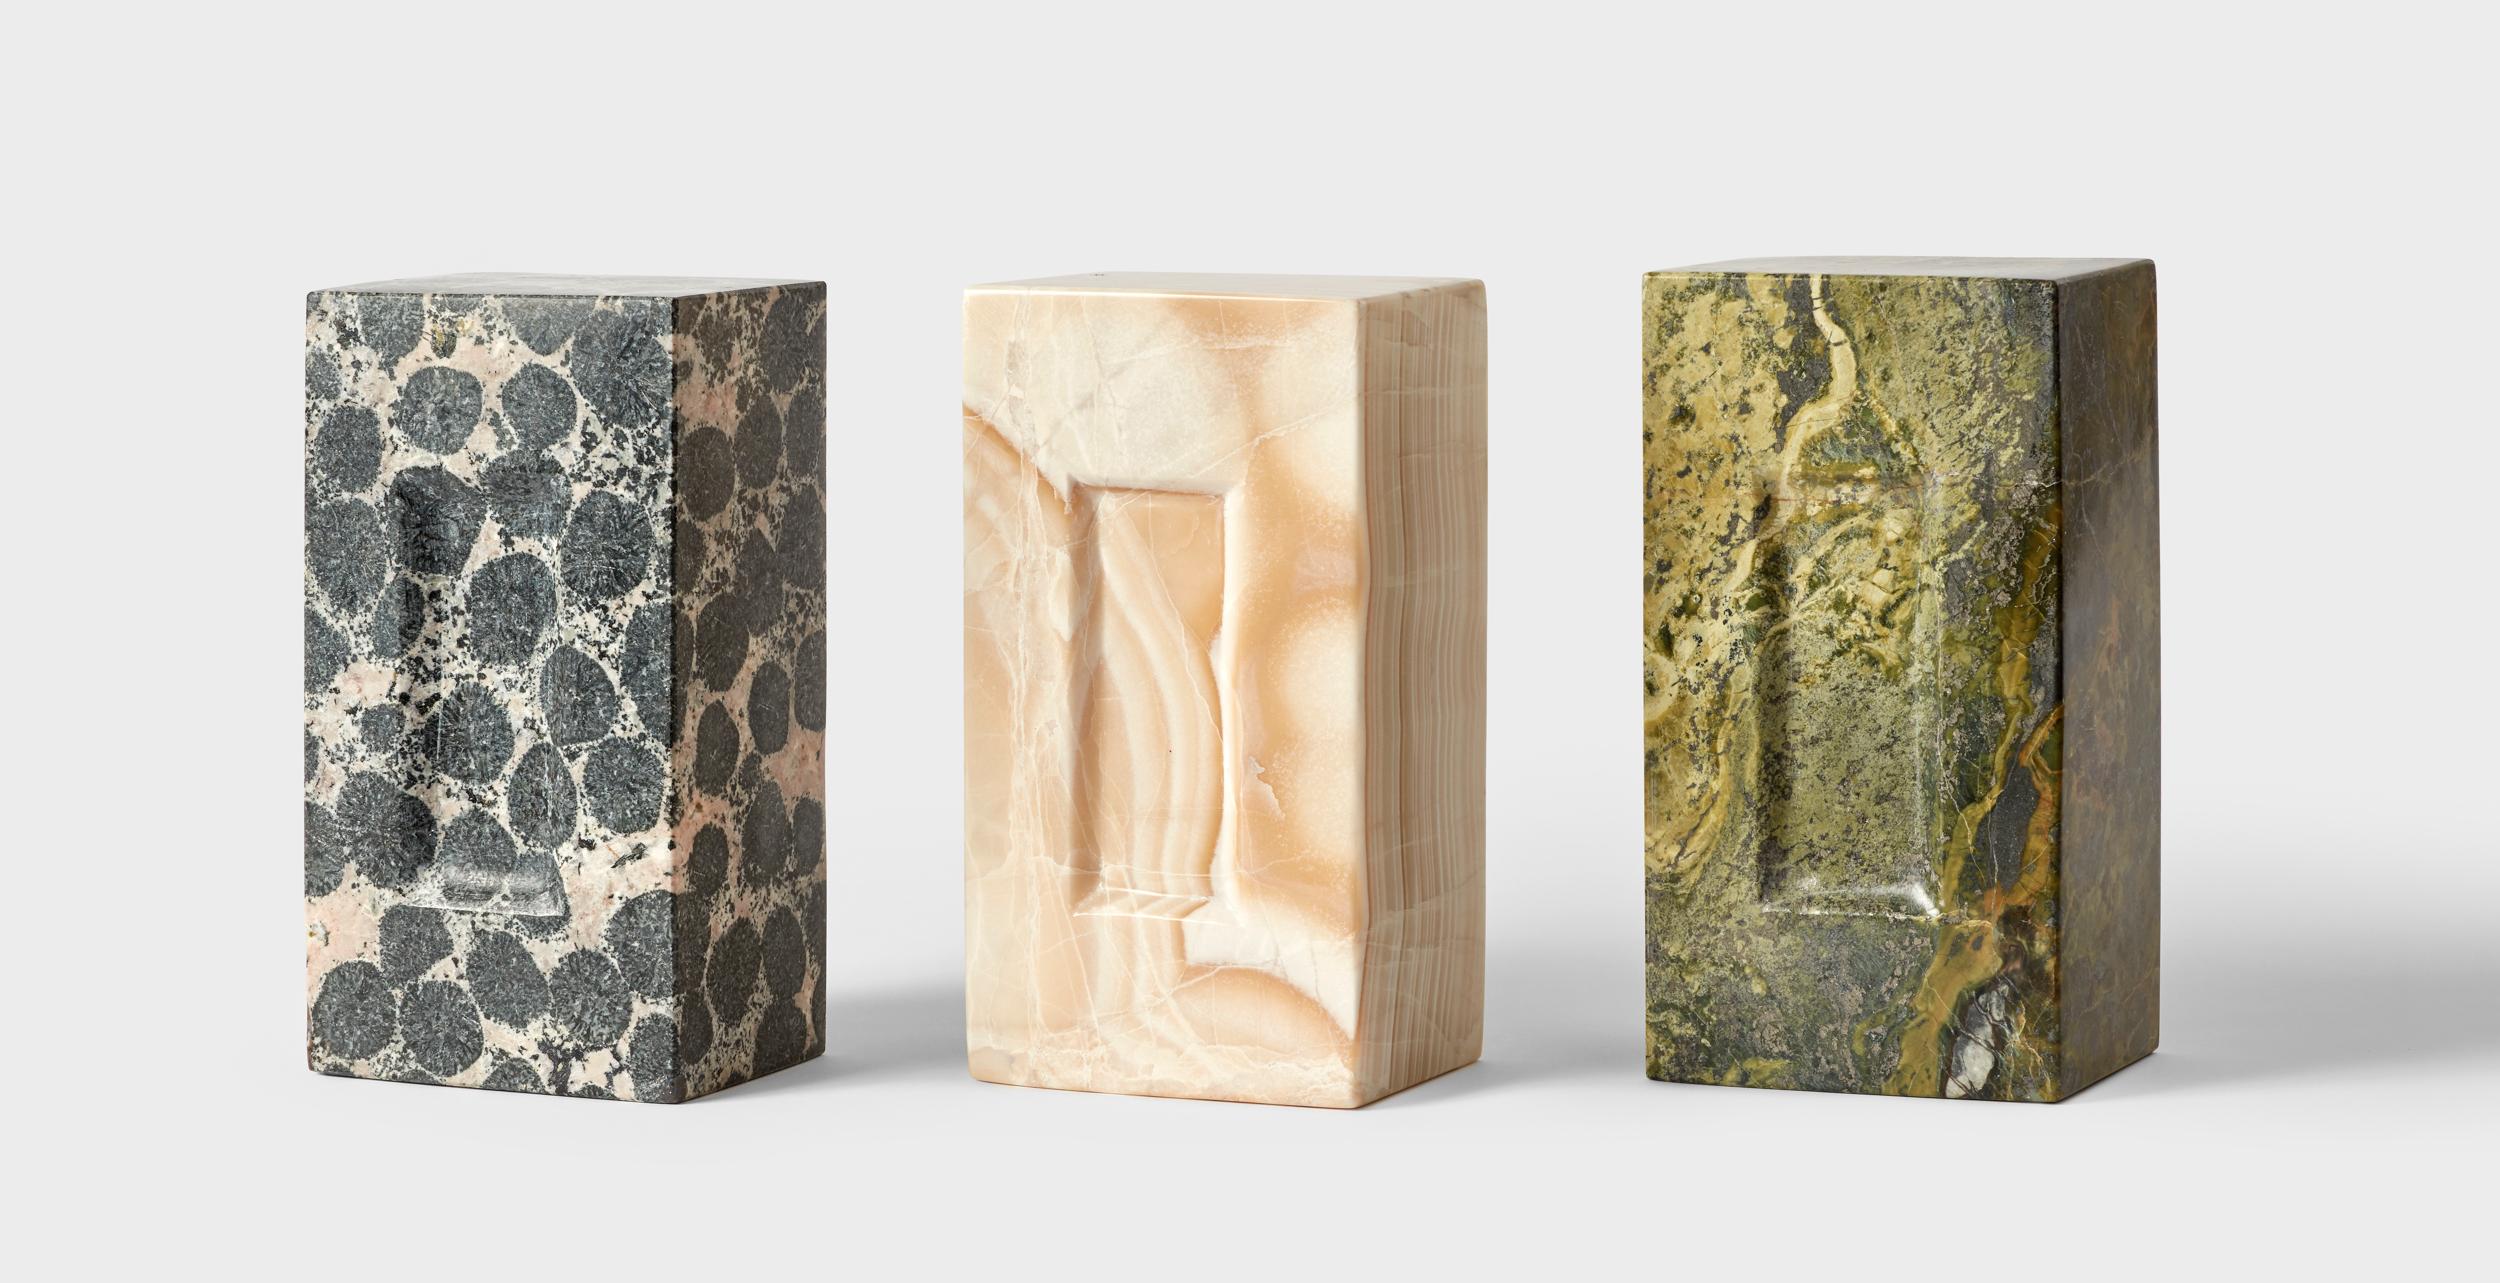 Set of 3 Bricks by Estudio Rafael Freyre
Dimensions: W 12.5 D 9 x H 23 cm
Materials: Andes Stones
Also Available: Other finishes available.

The brick is a generic constructive element that constitutes part of the urban imaginary. In Peru,